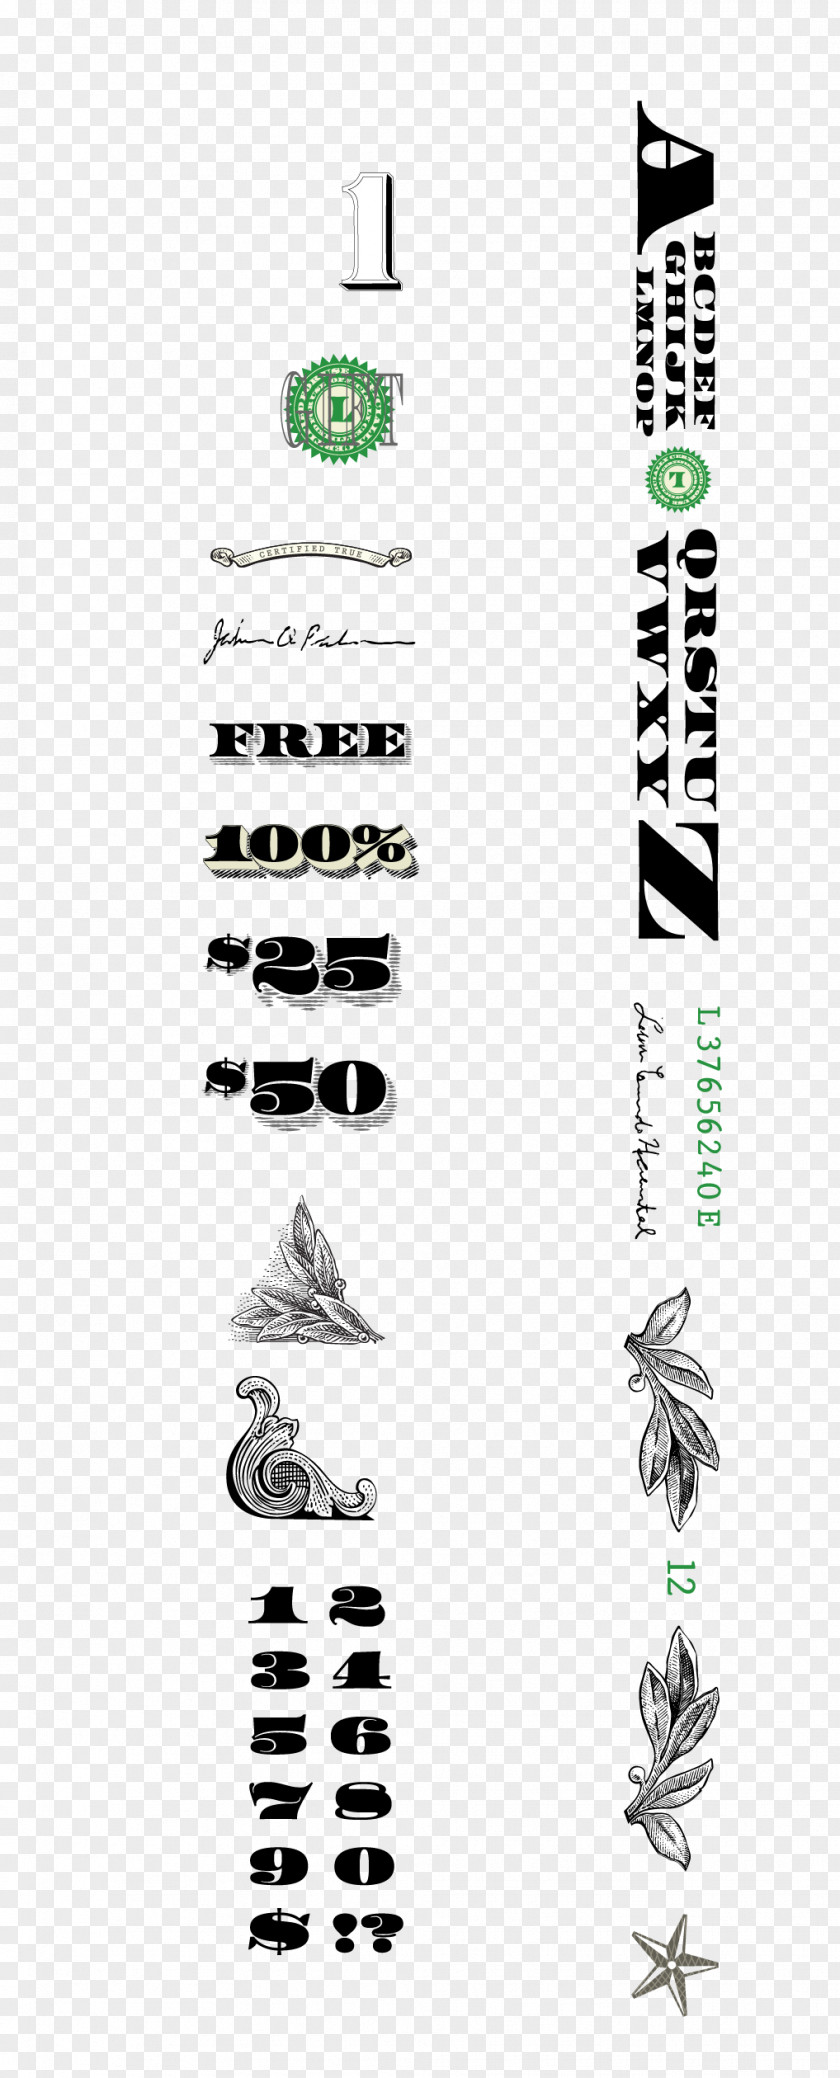 Banknotes Decorative Elements Banknote Graphic Design PNG